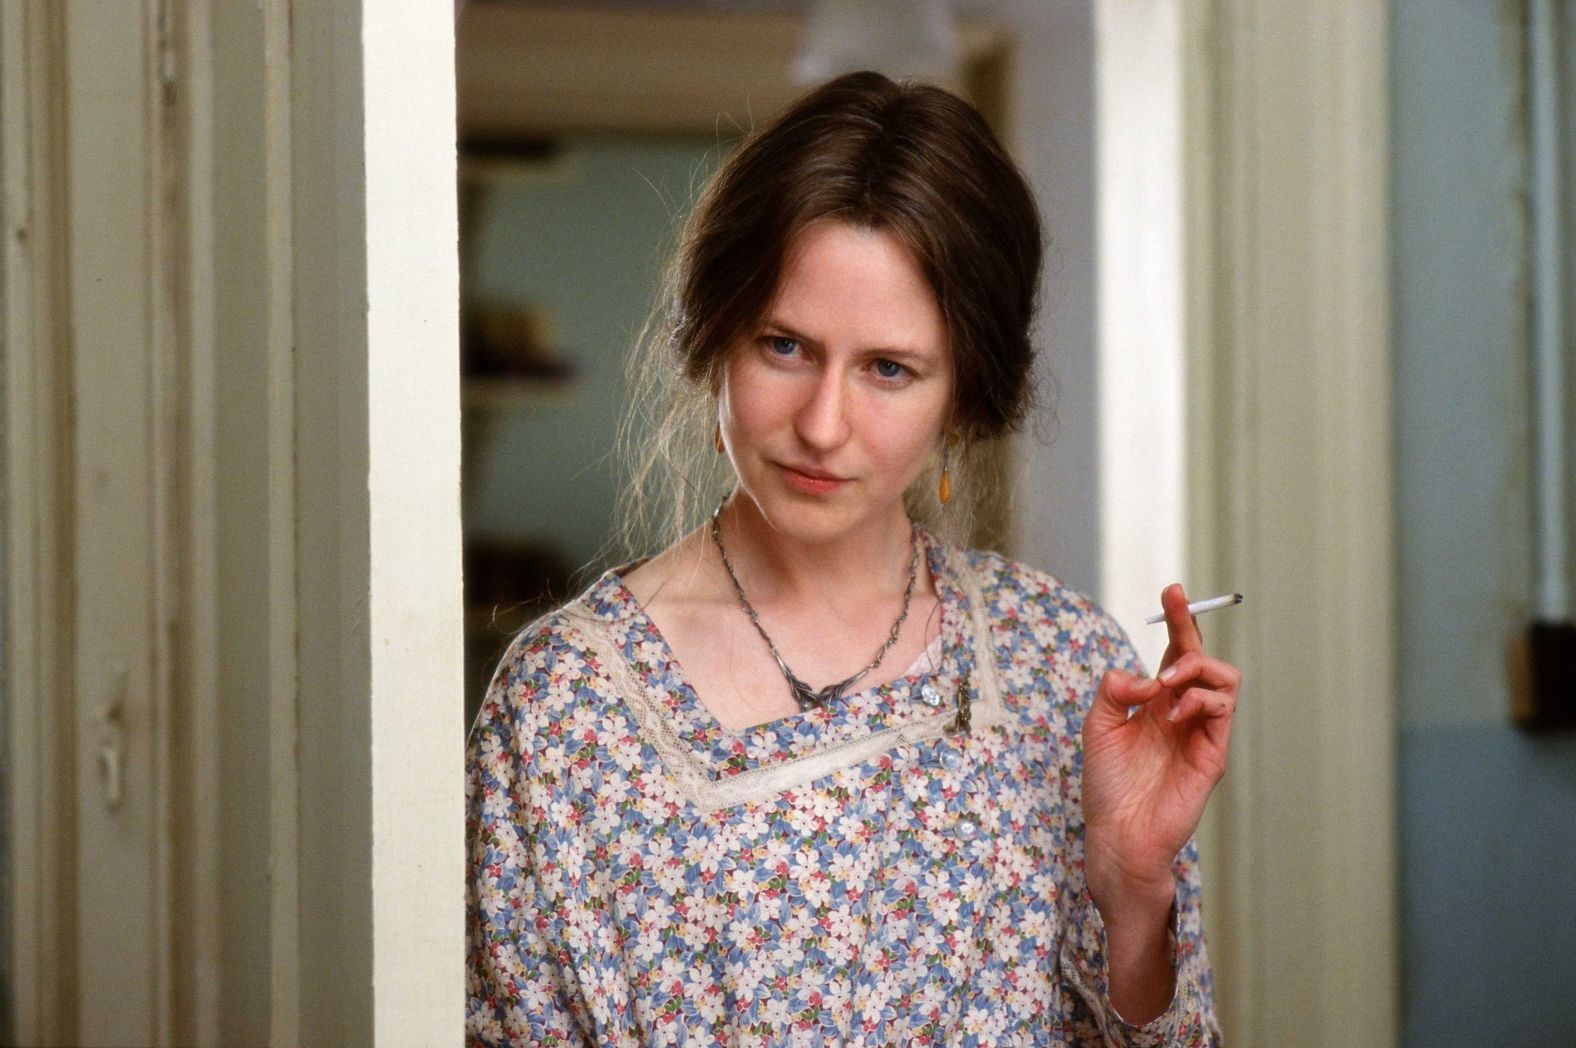 Kidman plays author Virginia Woolf in the 2002 film "The Hours." The role earned her the Academy Award for best actress.